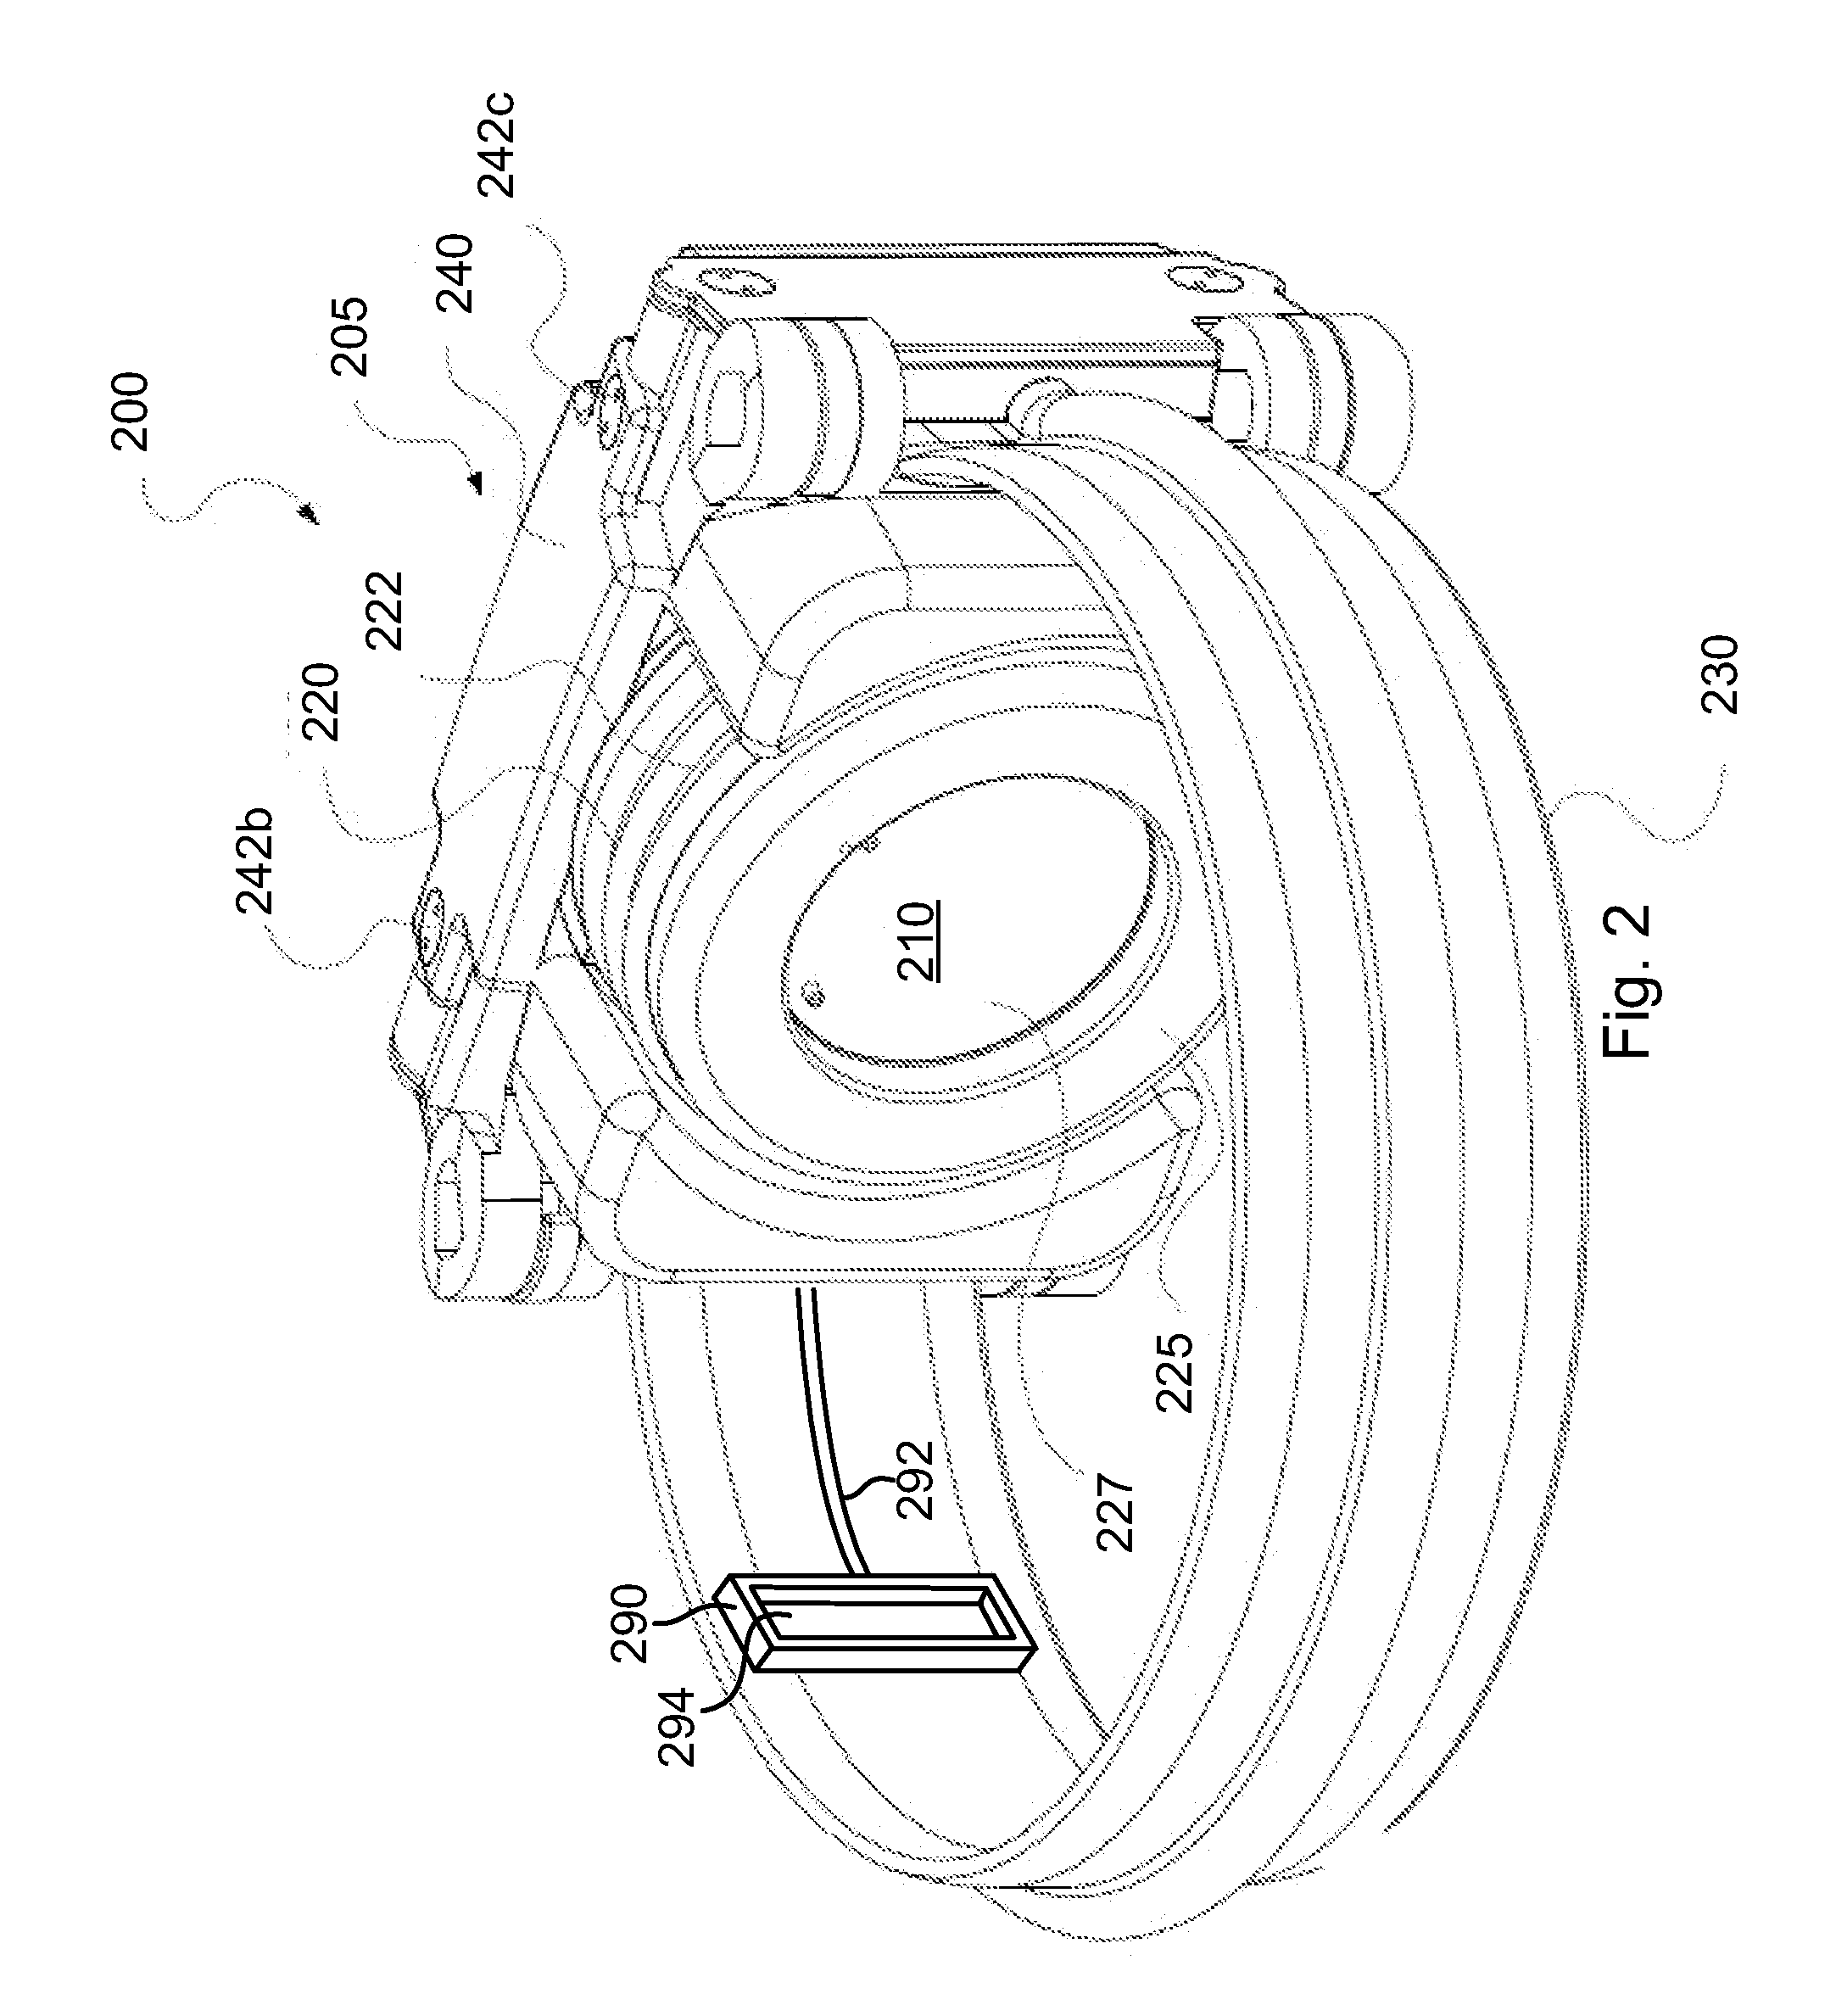 Systems and Methods for Alcohol Consumption Monitoring